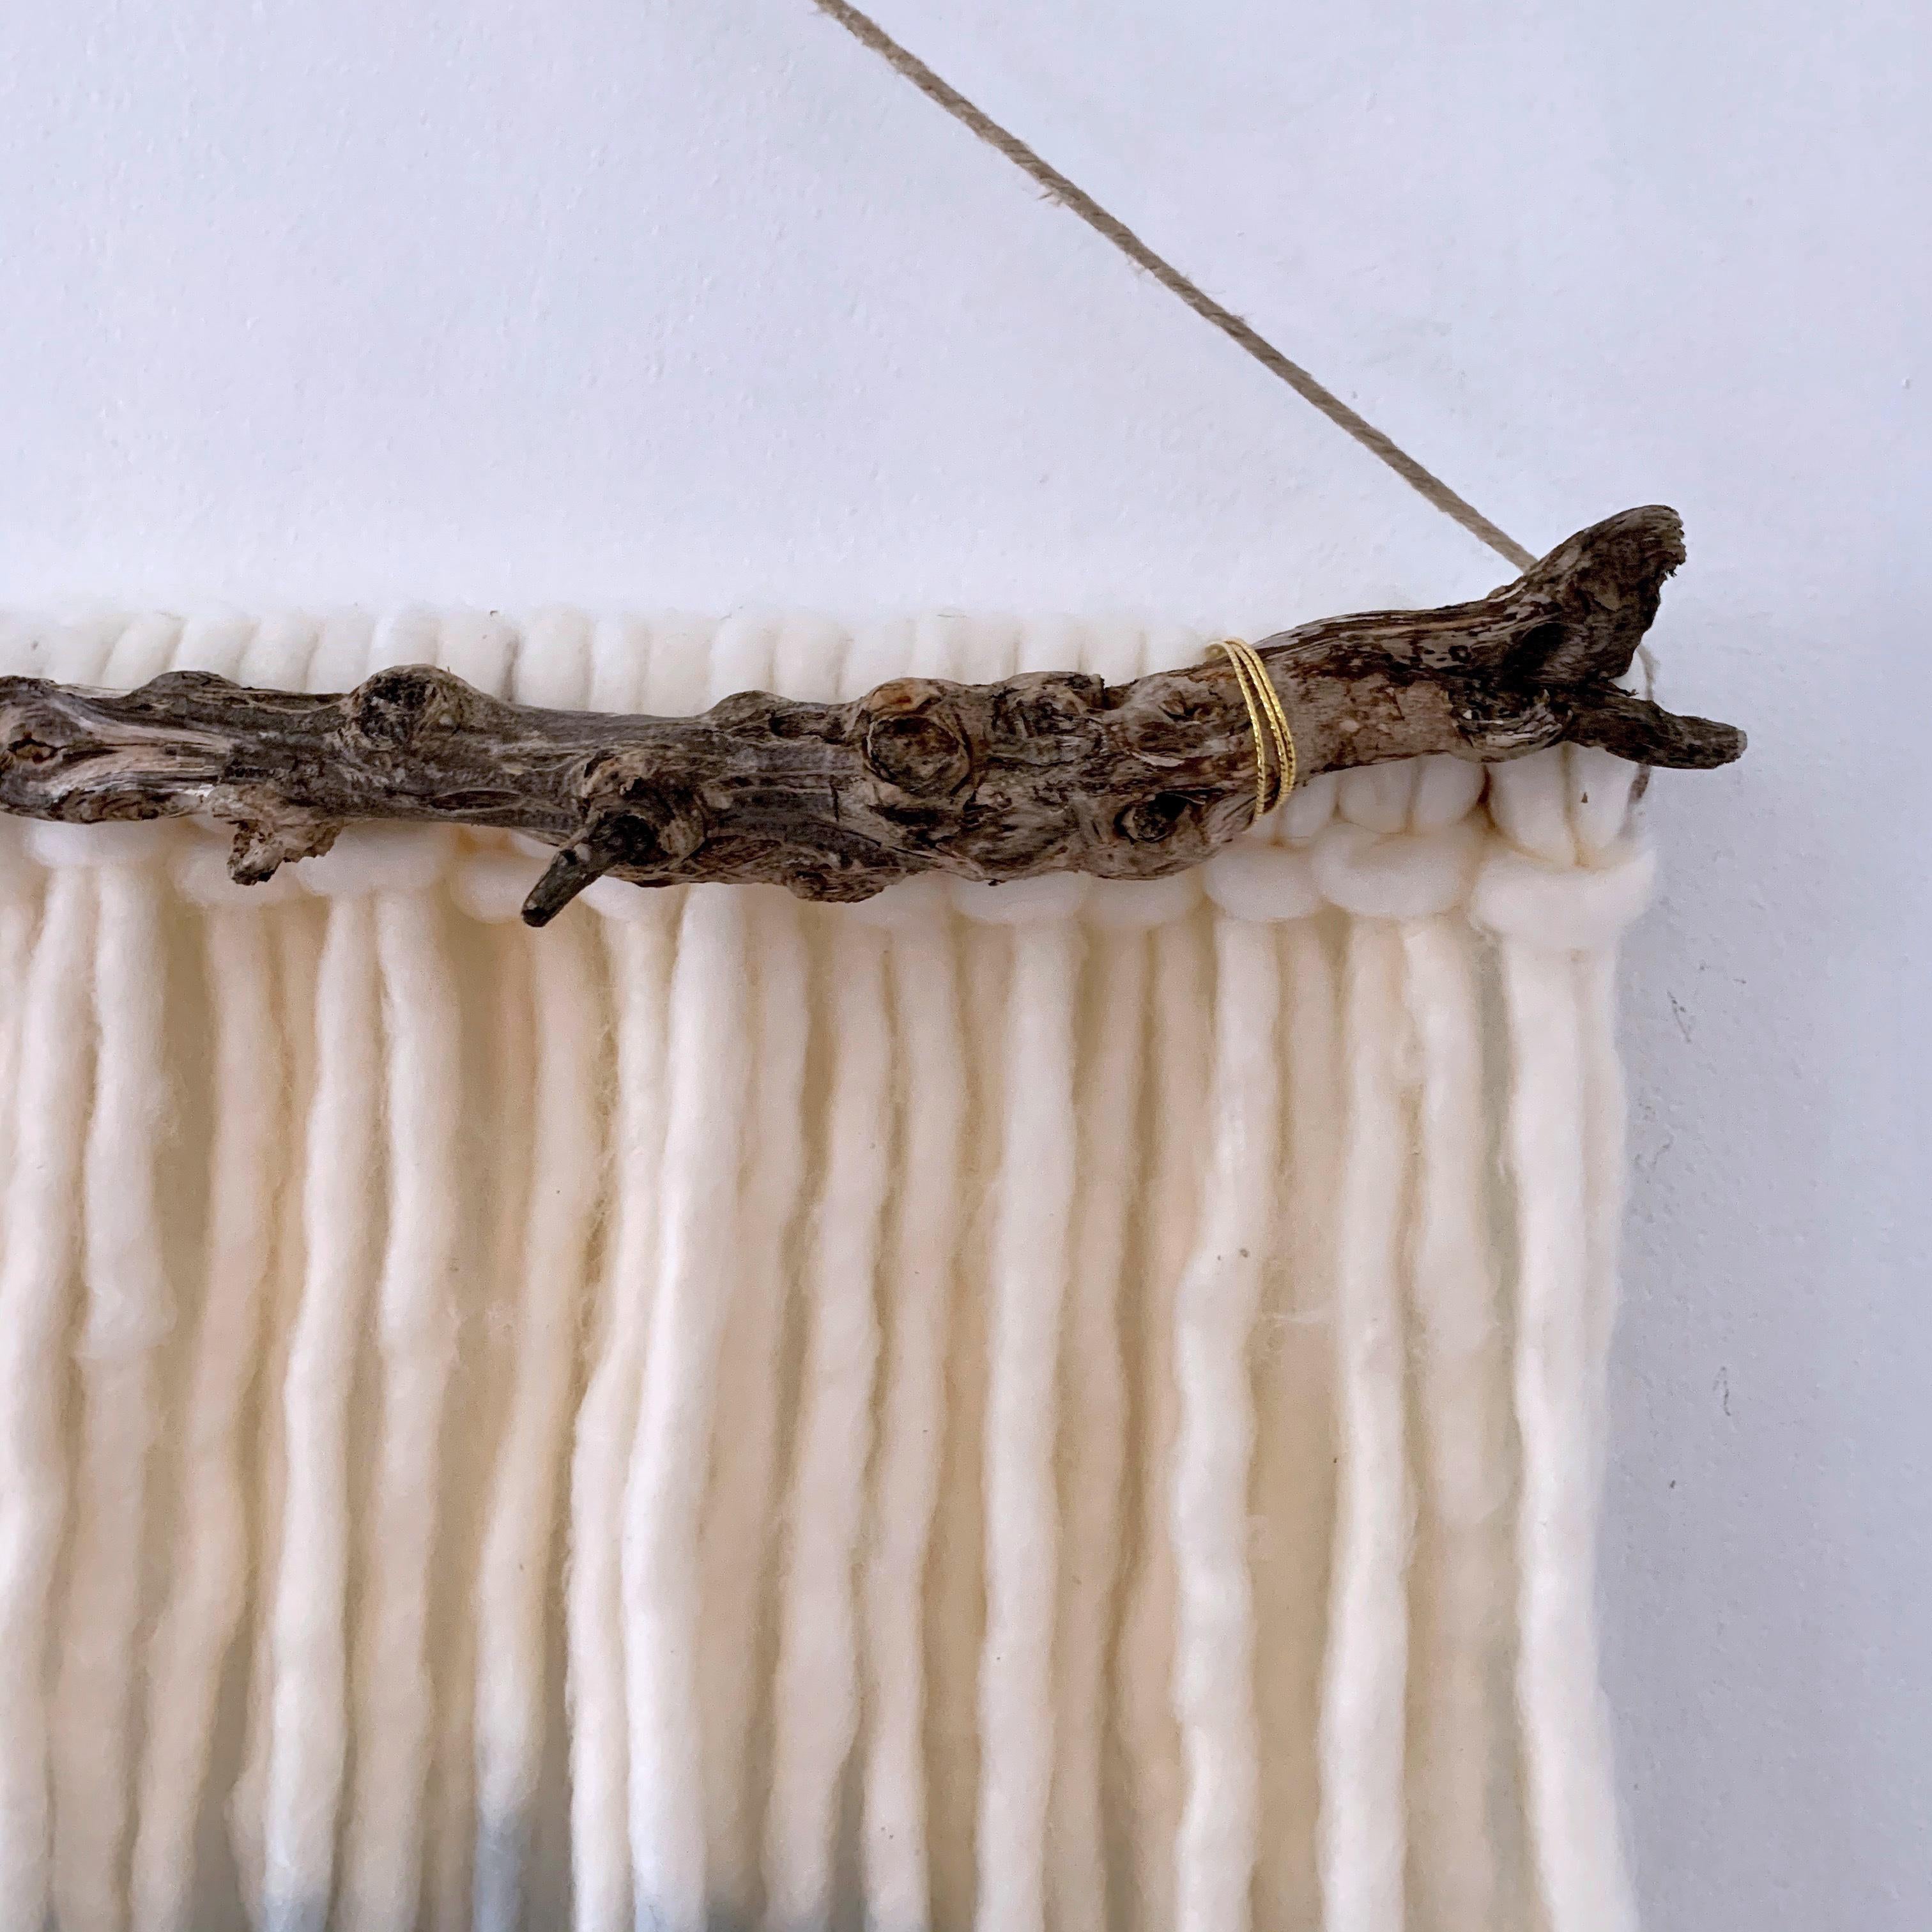 Shadow Dive, 2020, hand dyed Alpaca wool, drift wood, wire, copper pole, jute, decorative wall hanging.